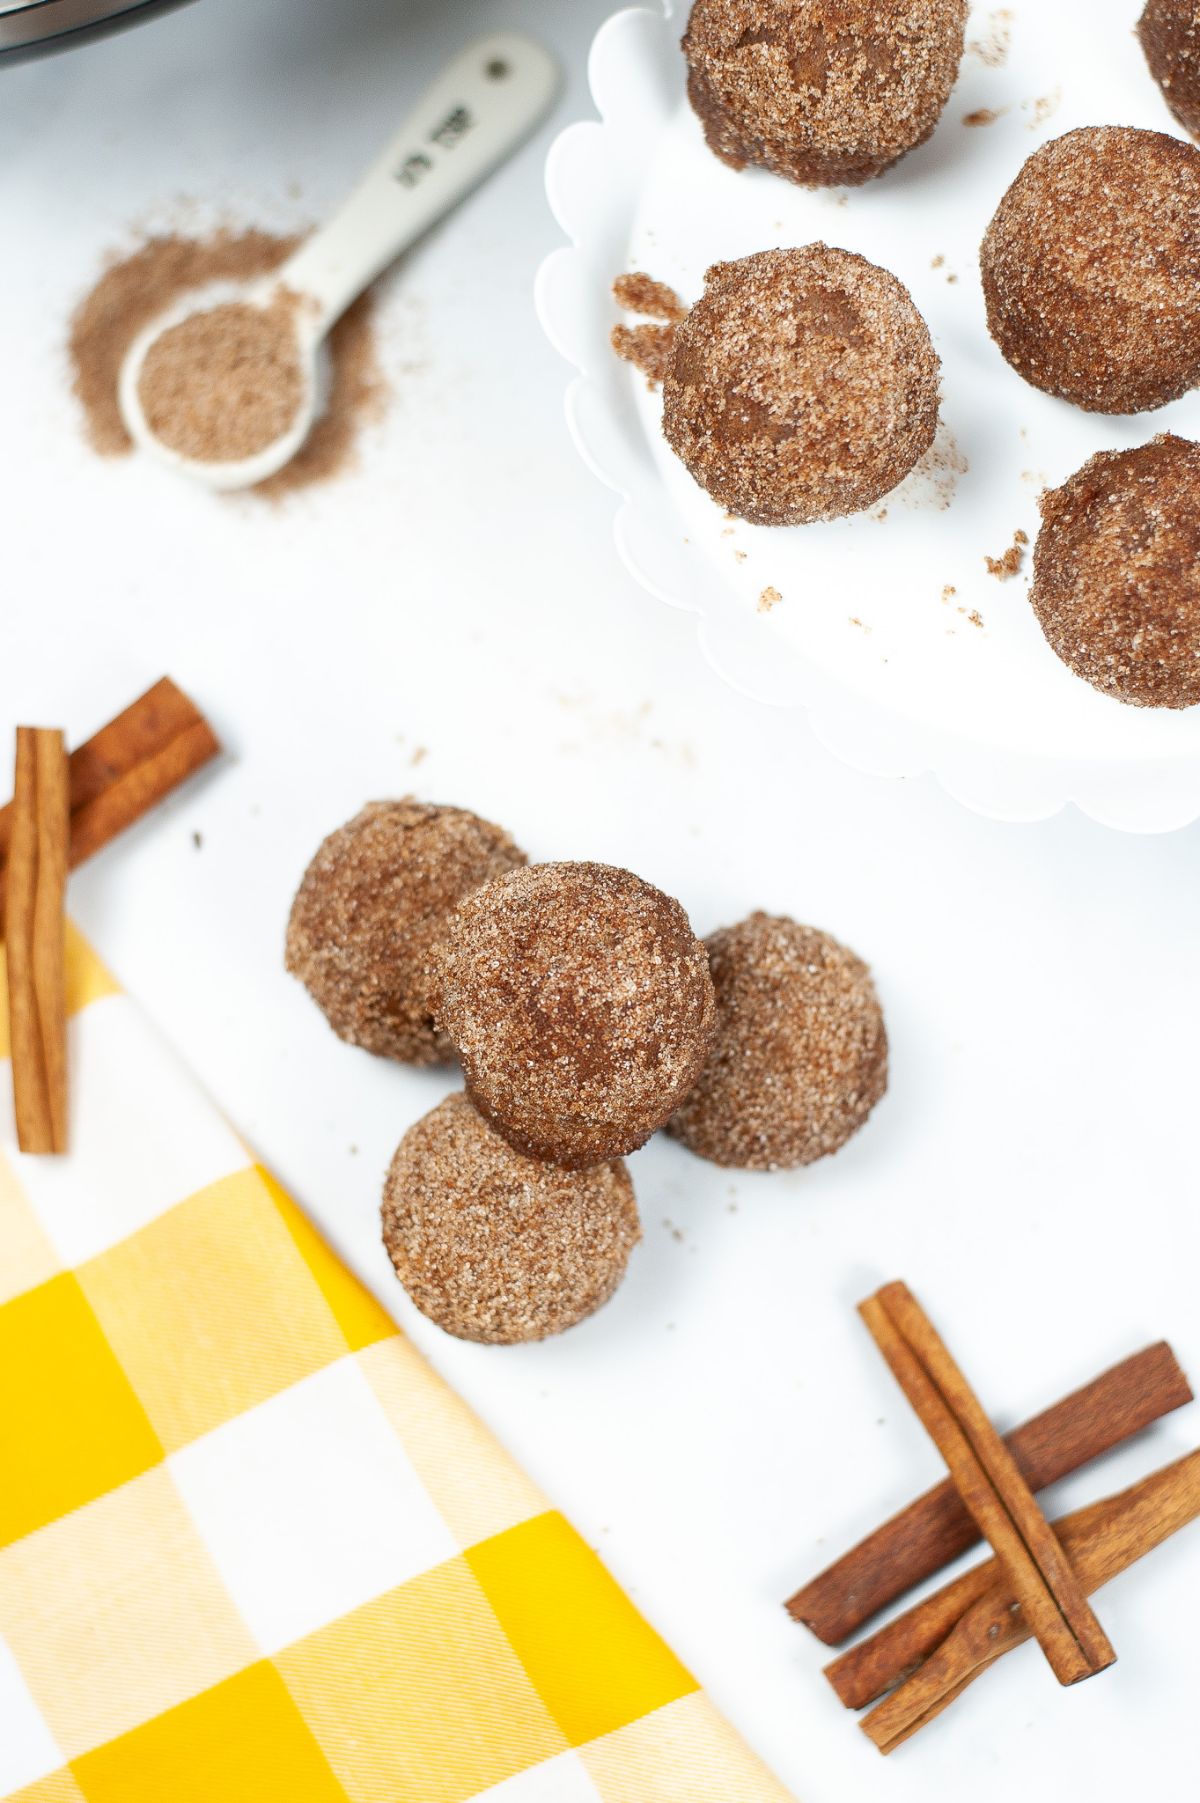 Instant Pot Churro Bites coated in cinnamon and sugar next to cinnamon sticks on a white plate on a yellow and white checkered cloth